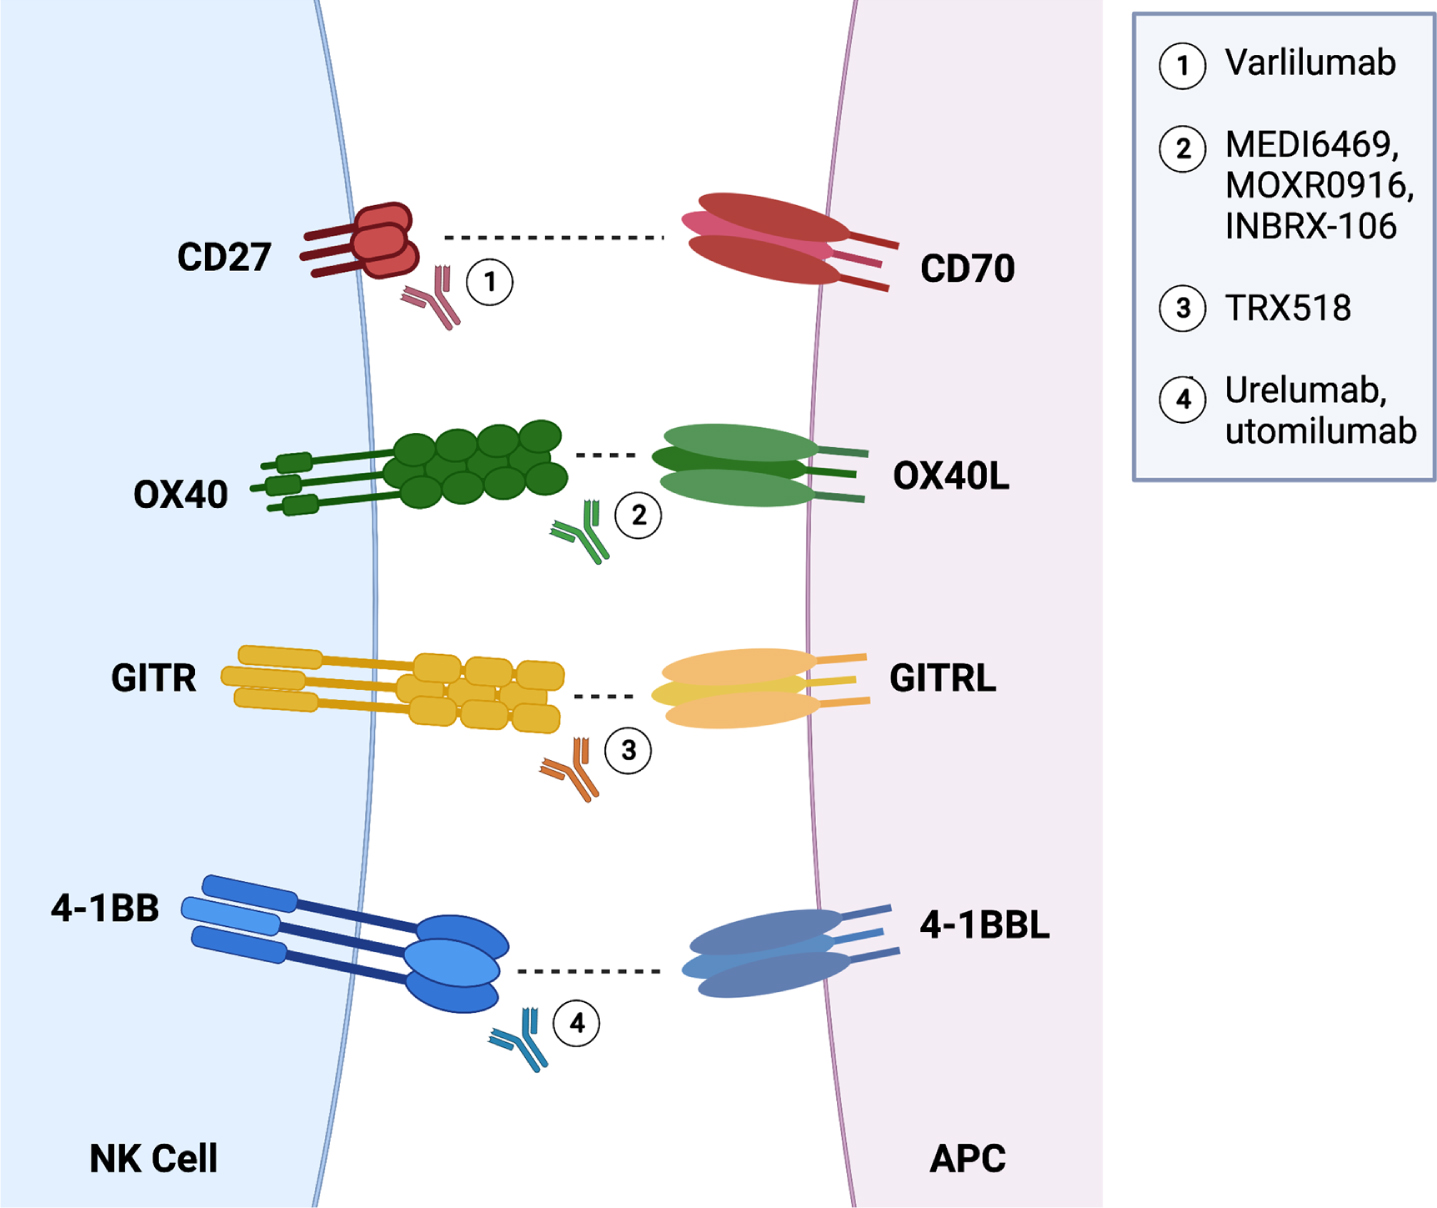 Schematic representation of activating (and potentially inhibitory) interactions between NK cells and antigen-presenting cells along with agonist antibodies being used for treatment across cancers.